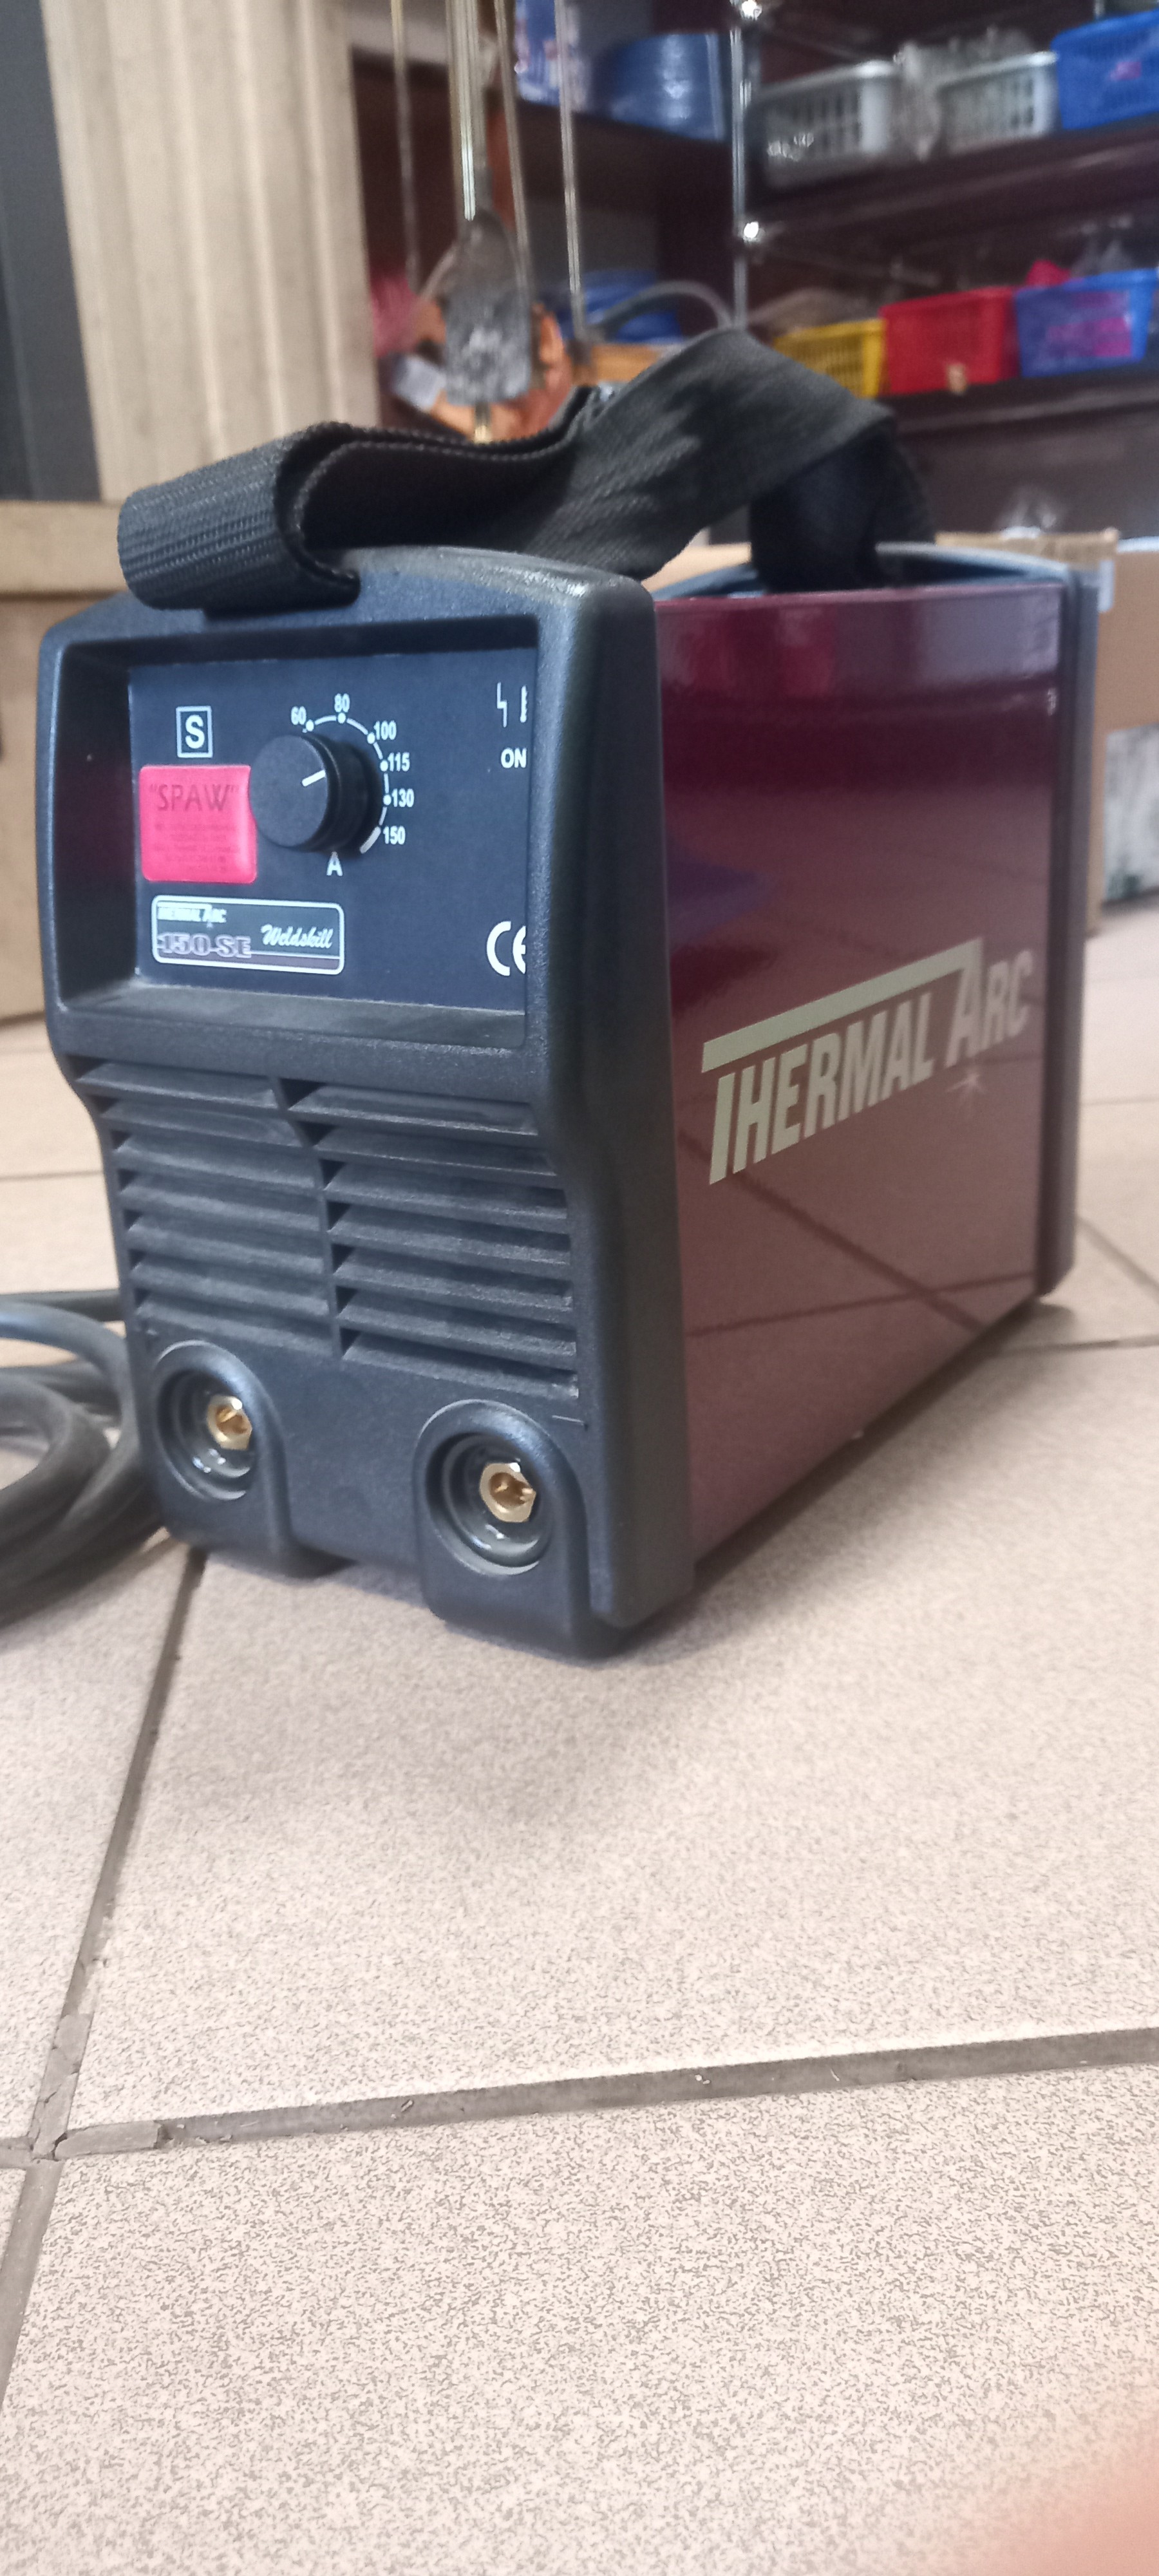 Thermal ArcMaster 150 CE